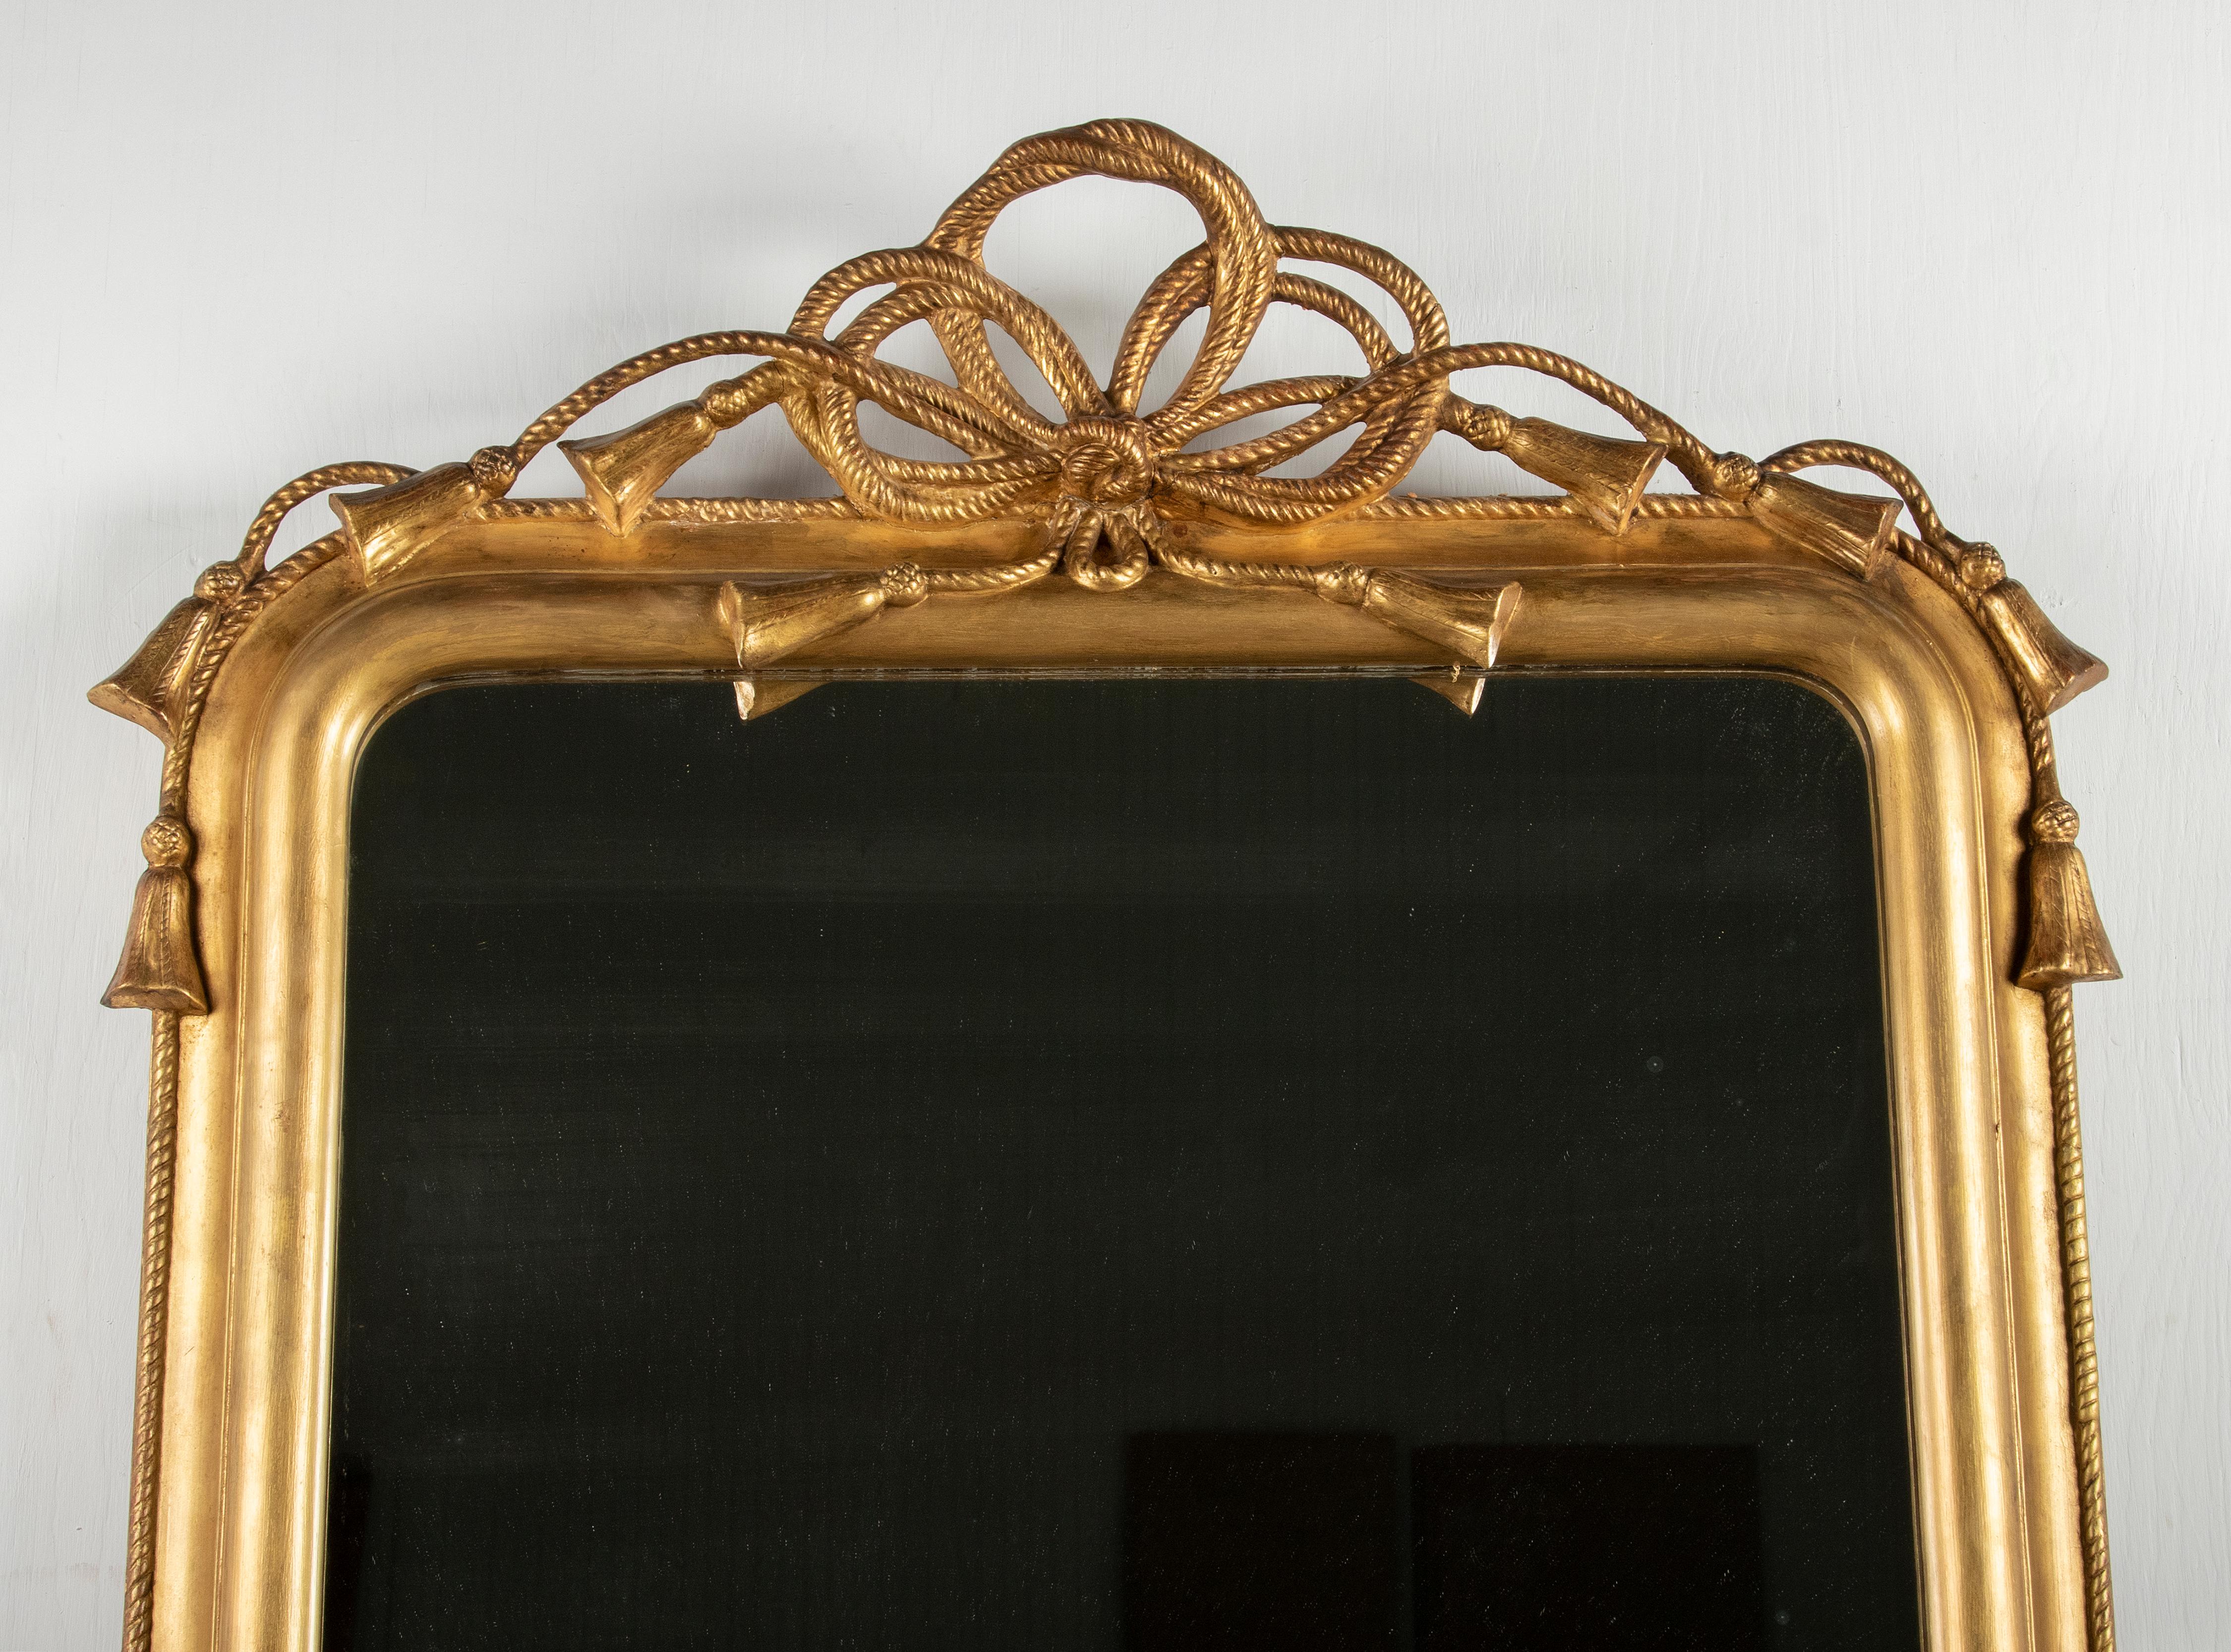 An elegant antique mirror with a crest of cords and tassels. Made in France, circa 1860 at he end of the Napoleon III period. The frame is made of pinewood, the moldings of there frame and rope and tassels are made of gesso. 

Originally the